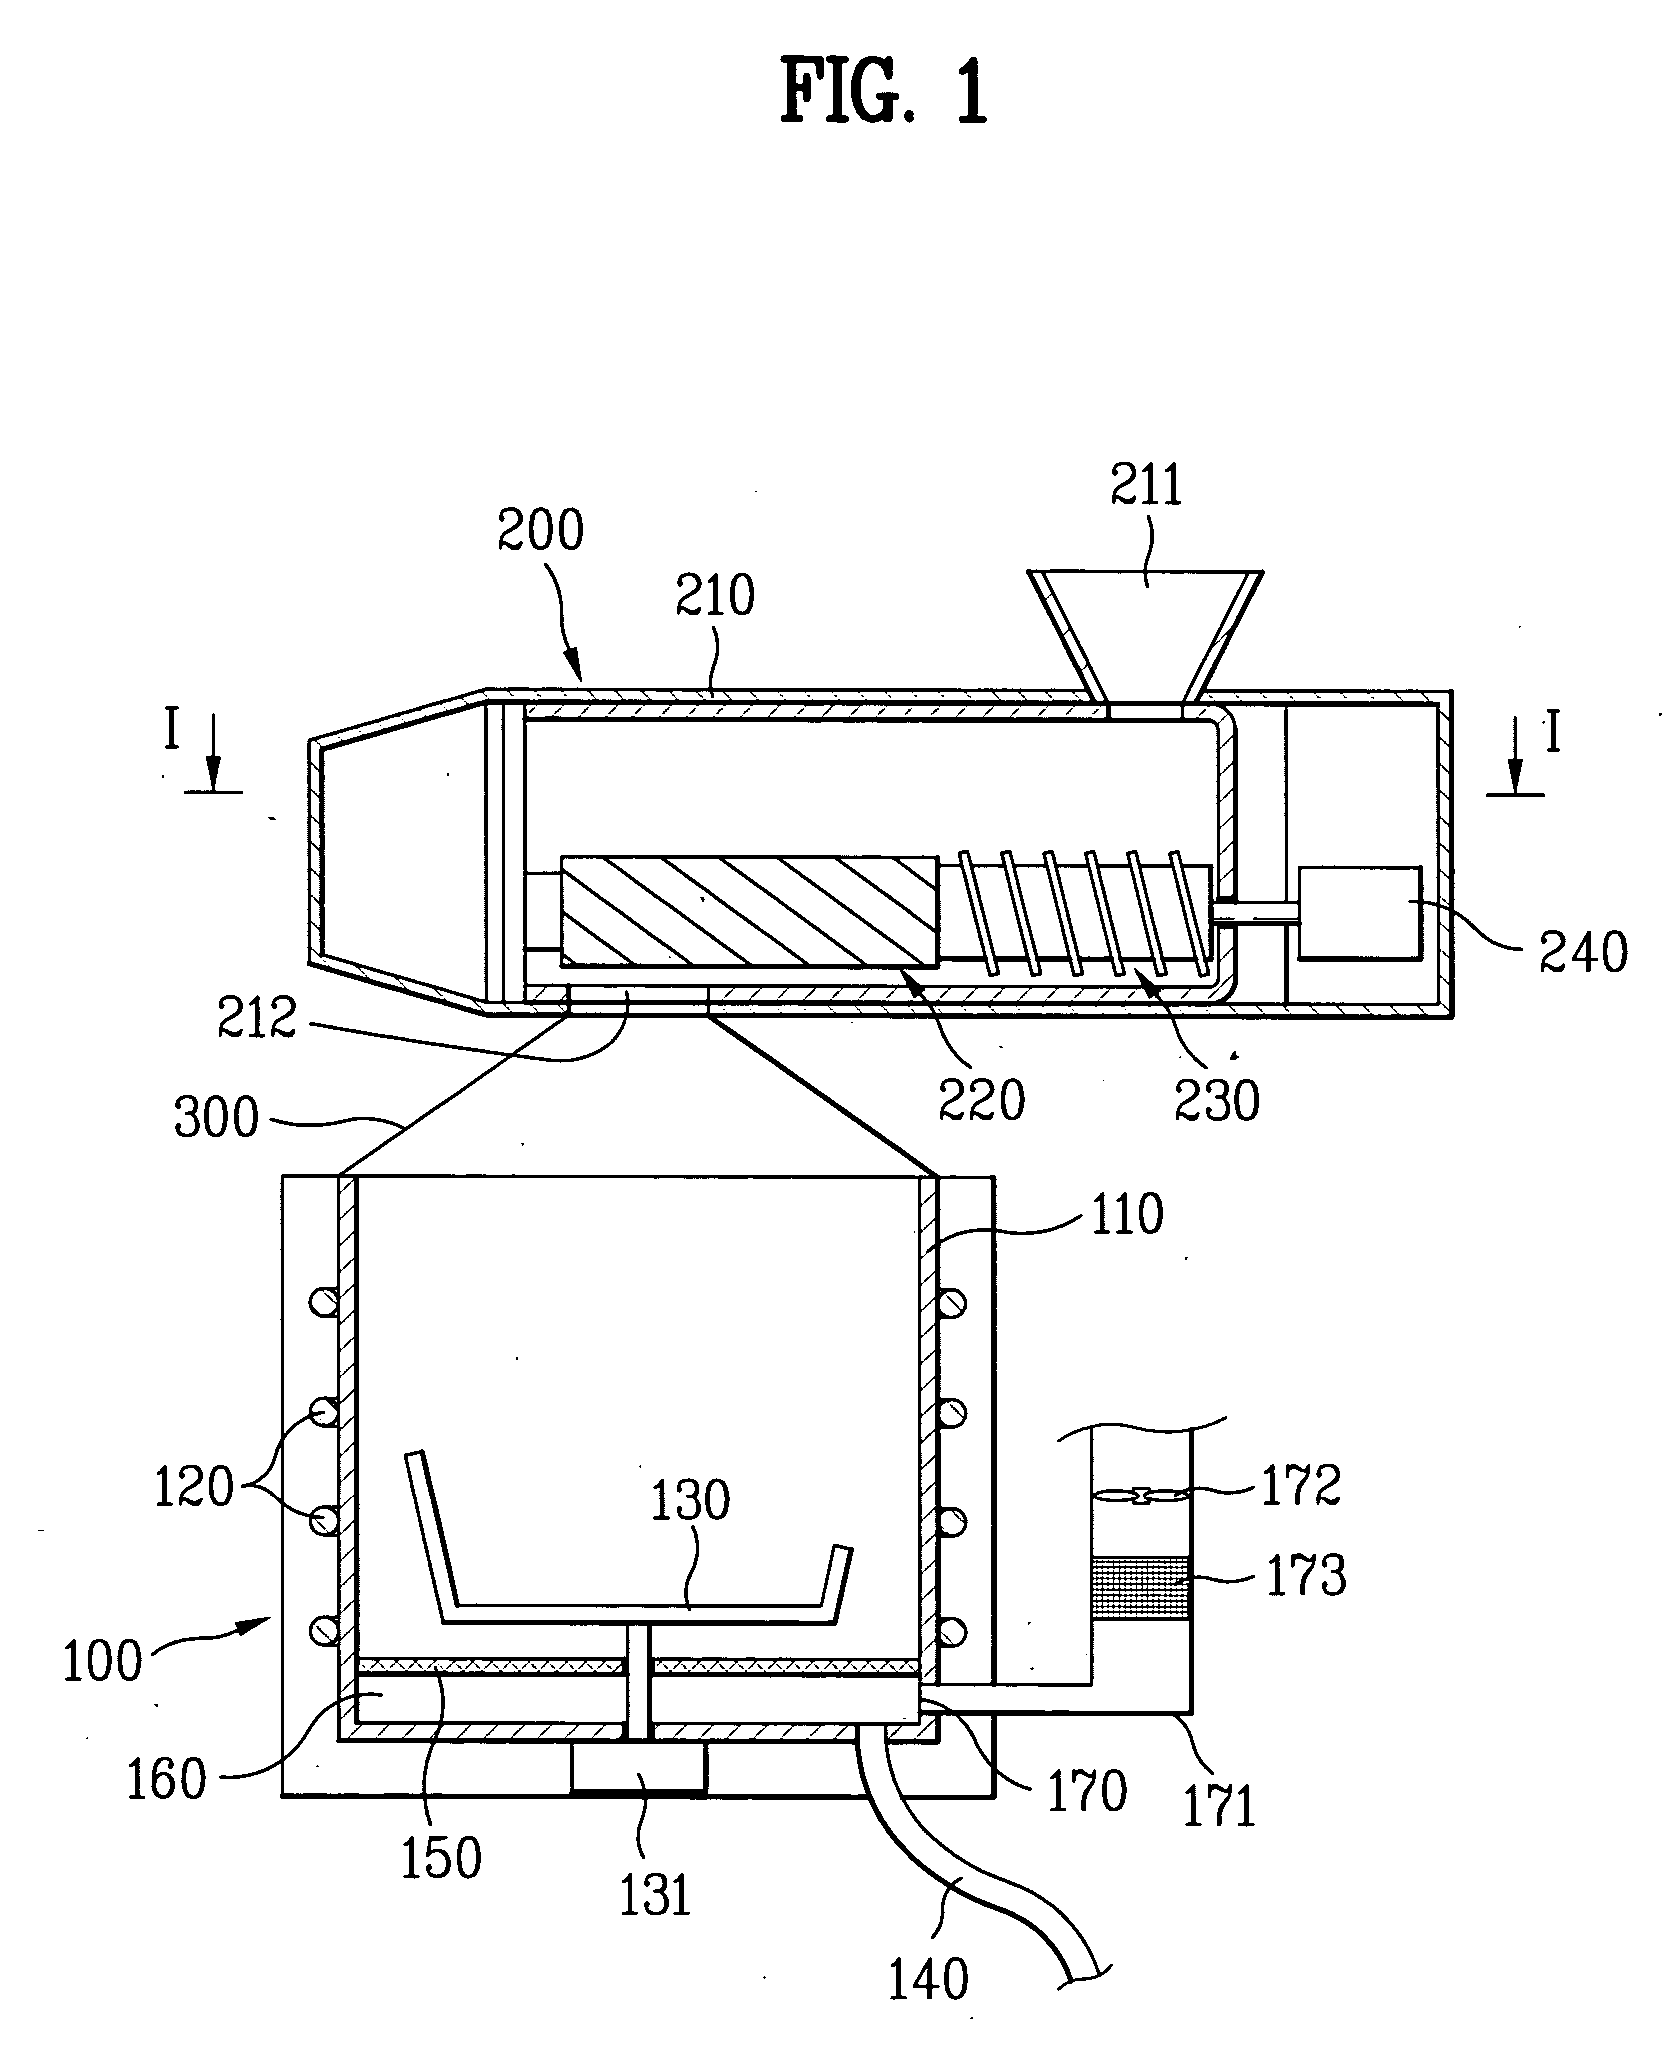 Apparatus for processing organic substances